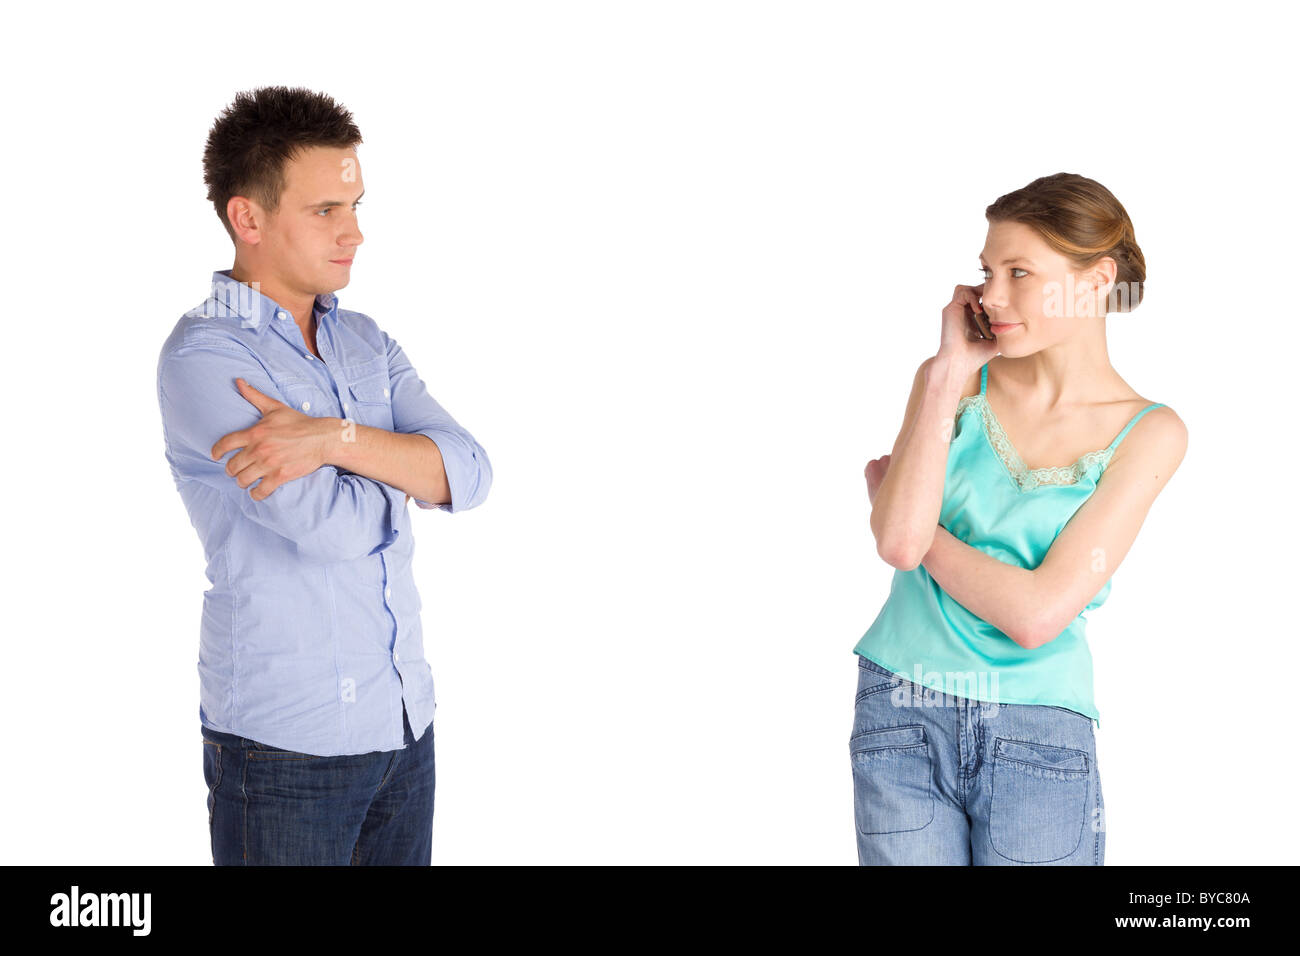 Impatient man standing with arms crossed looking at his girlfriend listening on the mobile phone Stock Photo